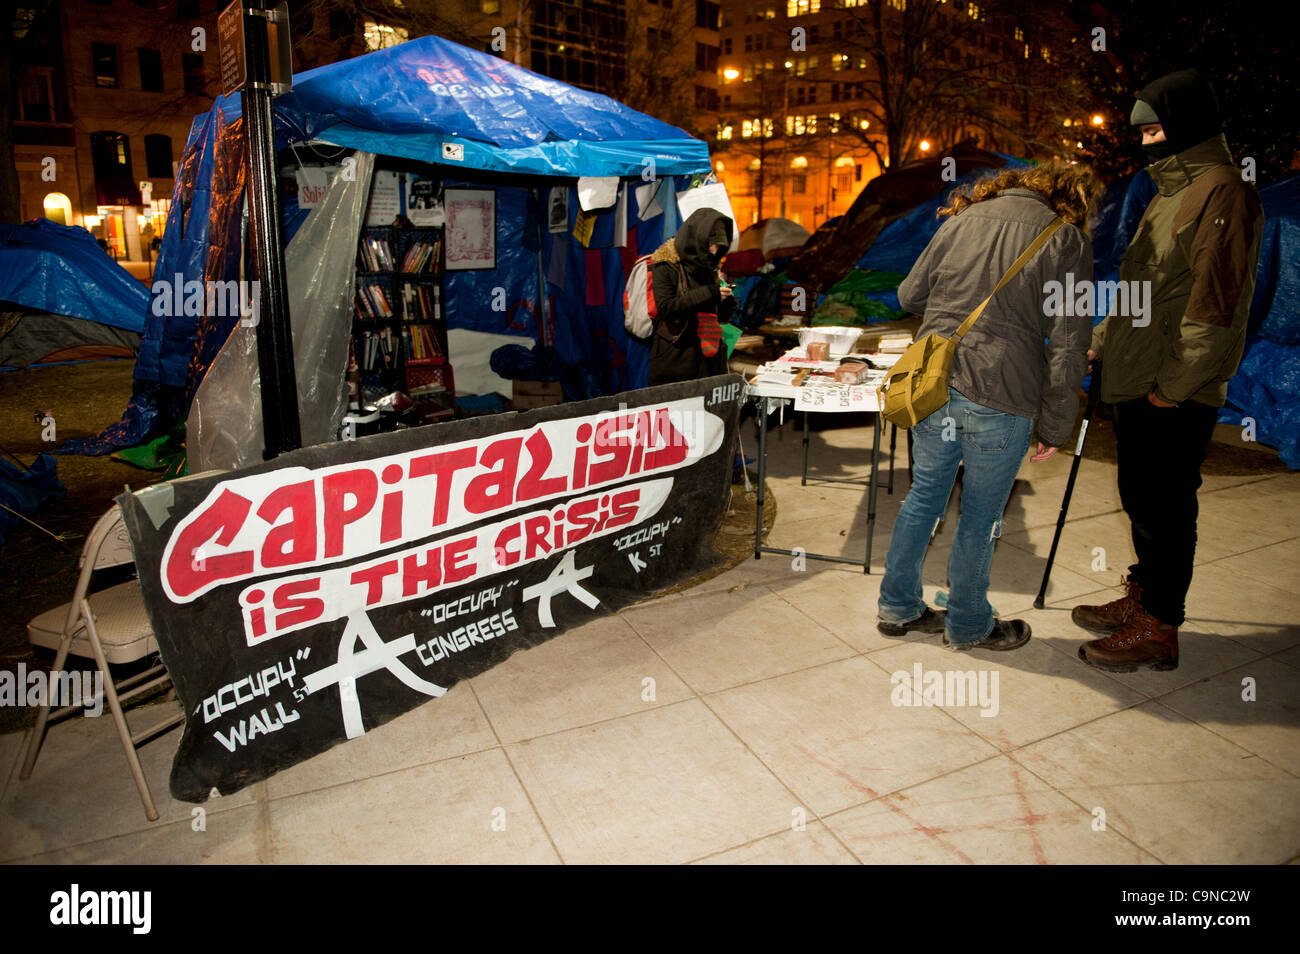 January 30, 2012, Occupy Washington DC, There are still plenty of tents and protesters on McPherson Square the night the city had told the Occupiers no more sleeping or camping in the park. Stock Photo